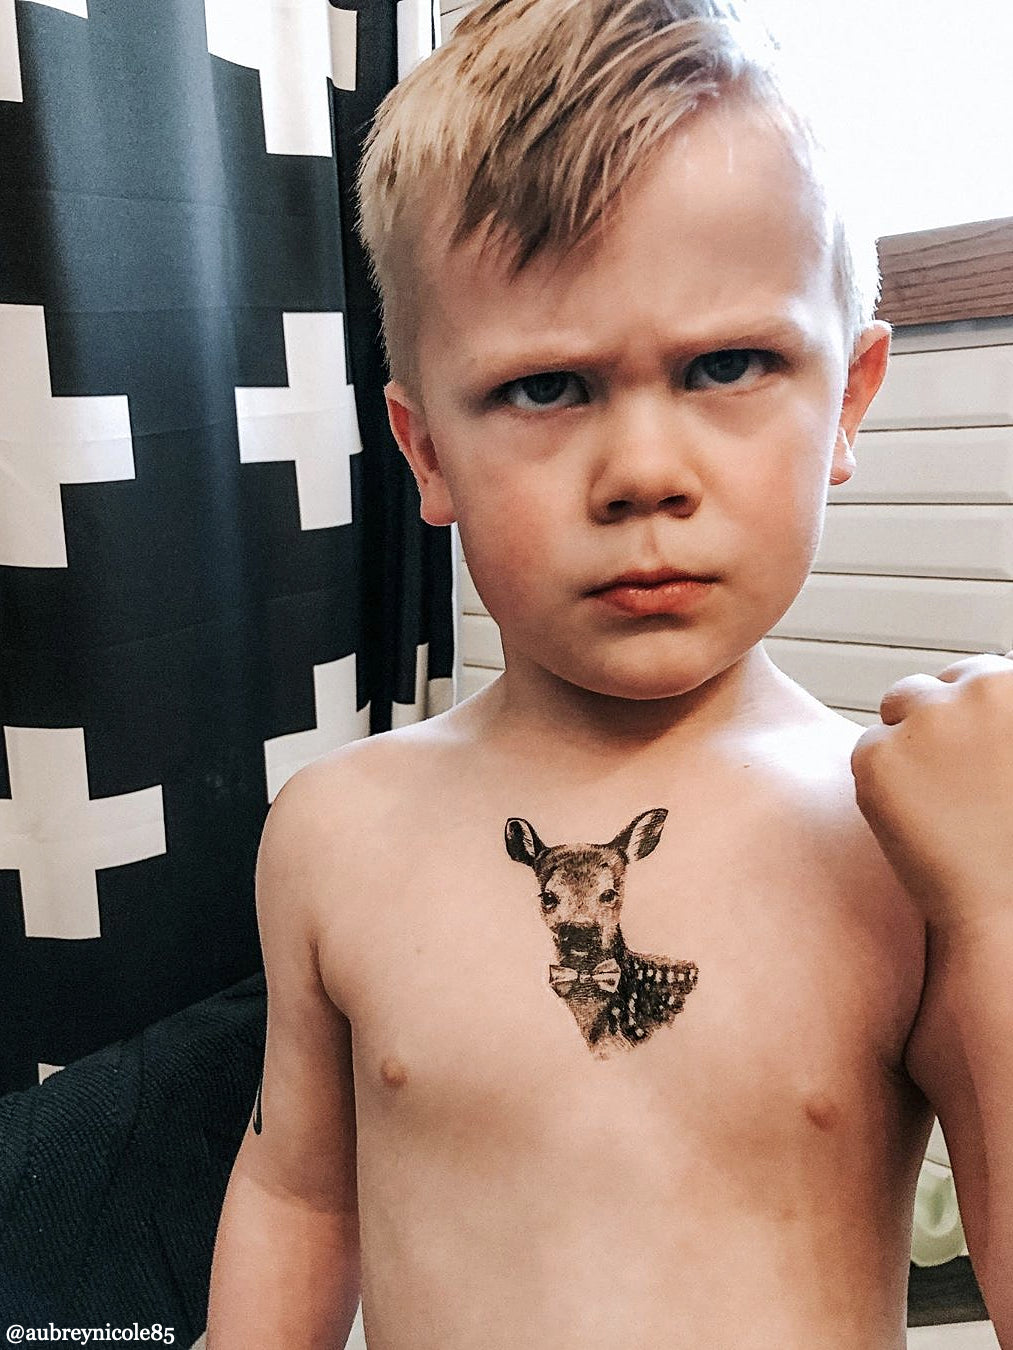 Florida Baby's Tattoos Are Temporary | Misbar